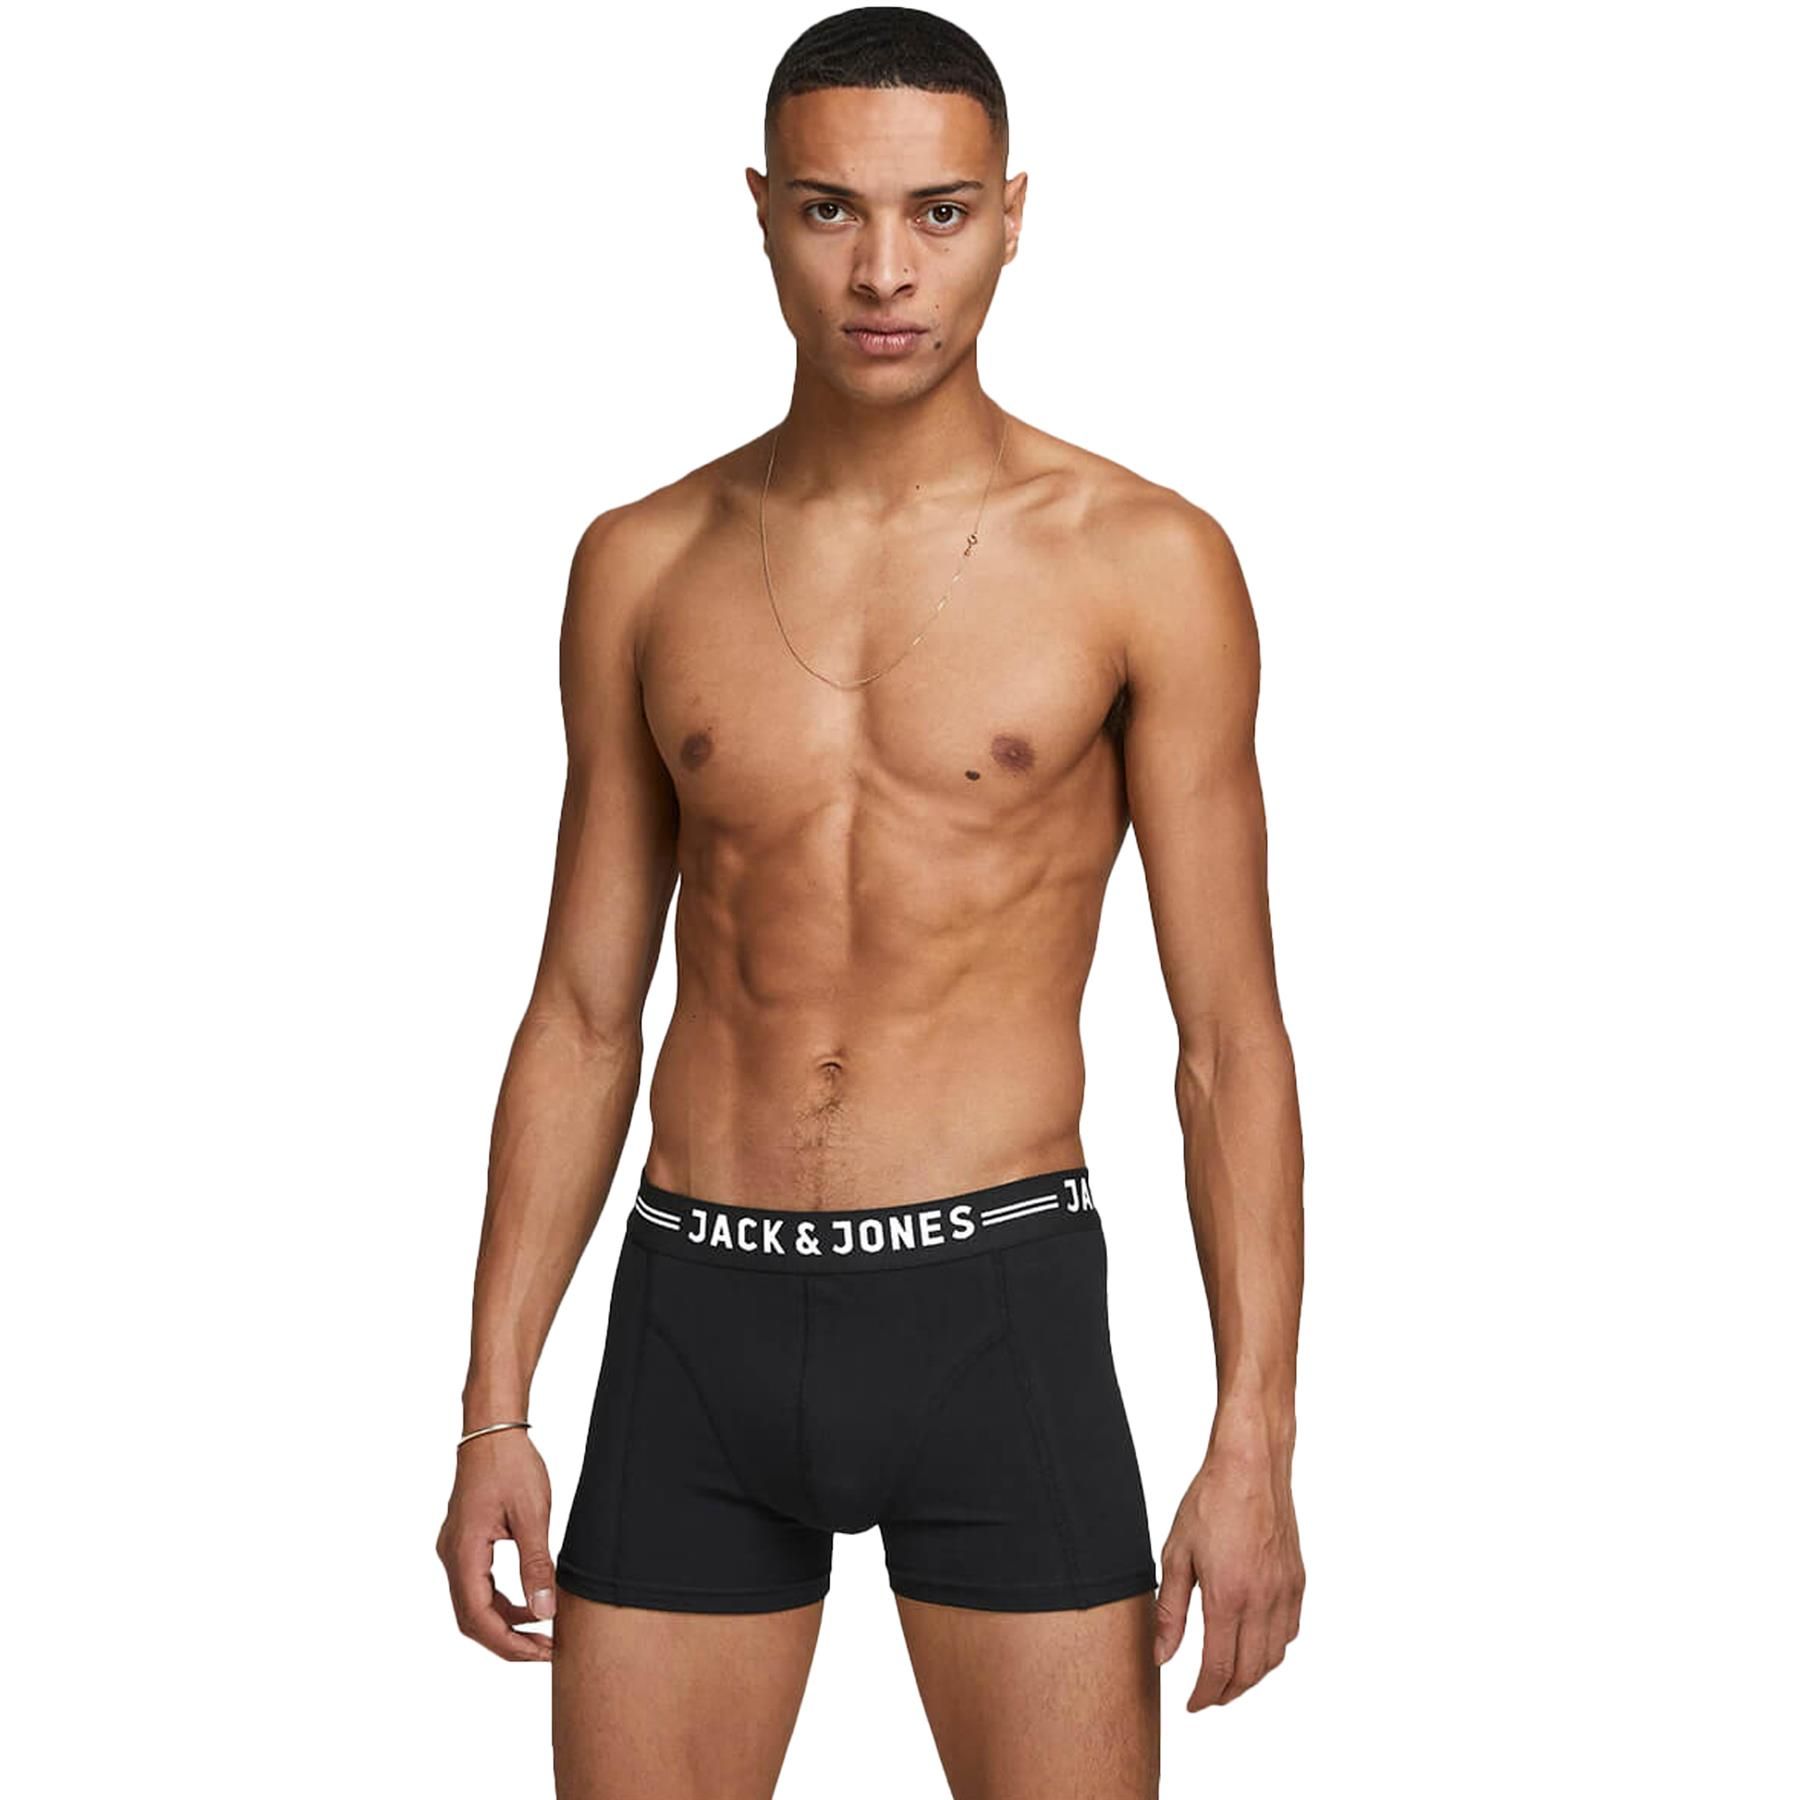 These Mens Classic Designer Boxer Shorts Featuring an Elasticated Waistband with Branding are available in a Packs of 3, Assorted Colours. 95% Cotton and 5% Polyester